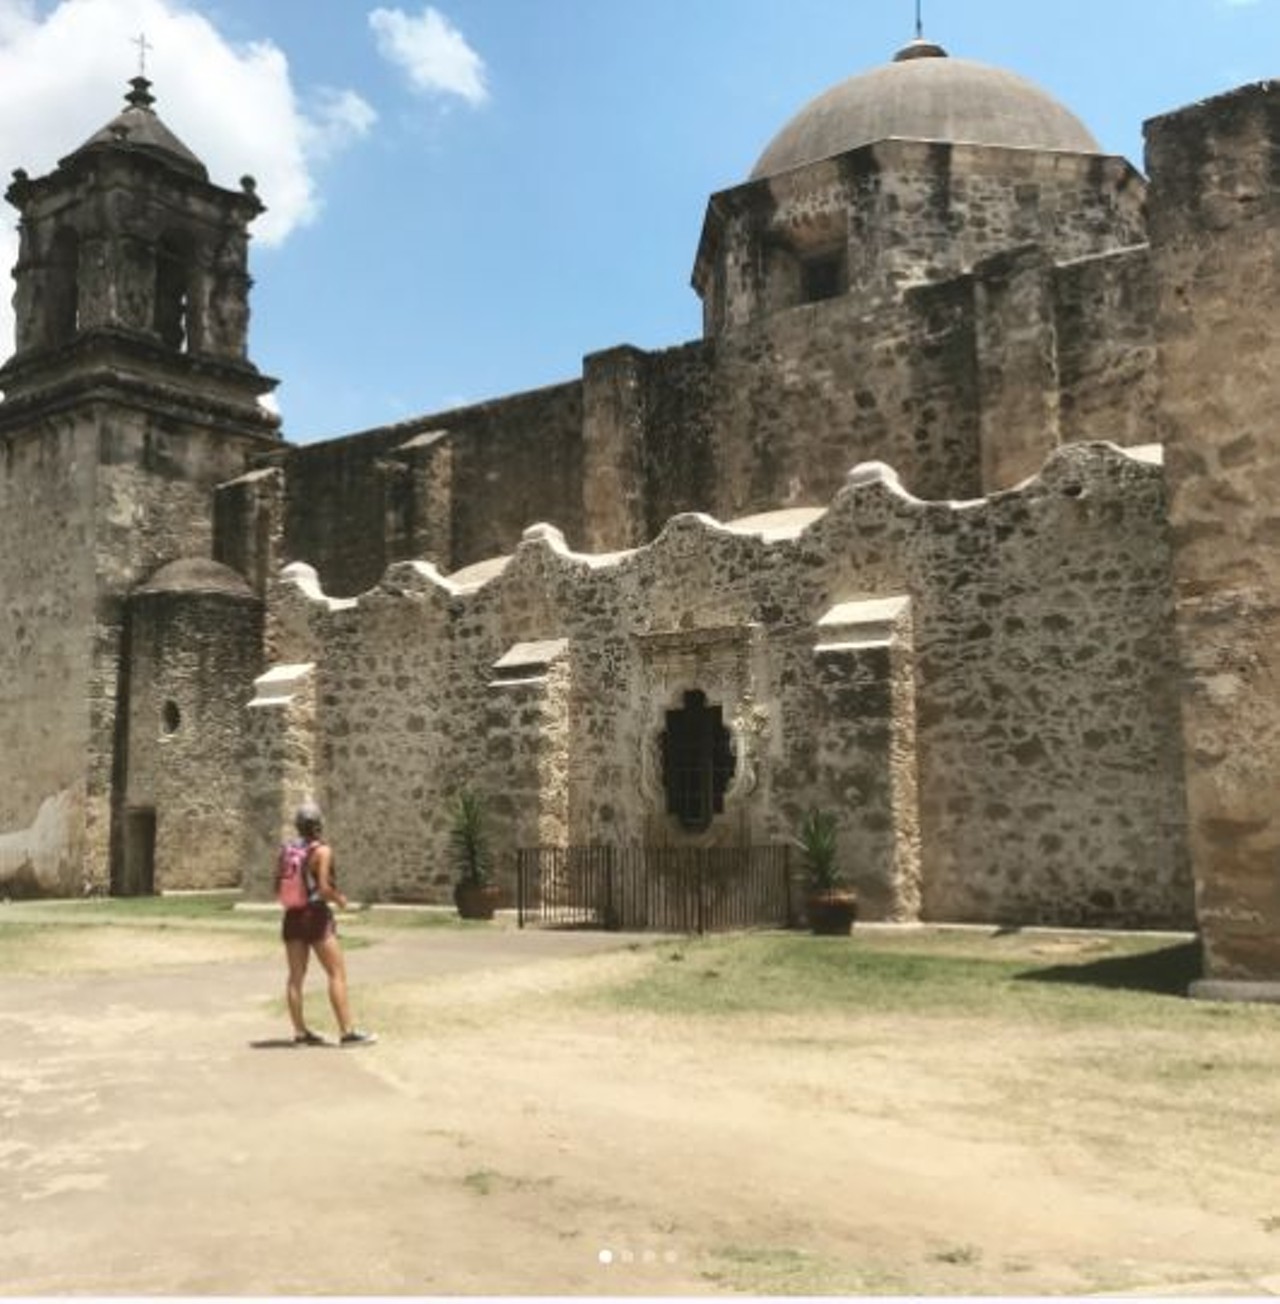 San Antonio Missions
6701 San Jose Dr
The drive might be a stretch to the gorgeous San Antonio Missions, but anything for a good picture right?
Photo via Instagram 
segoviaashley_
